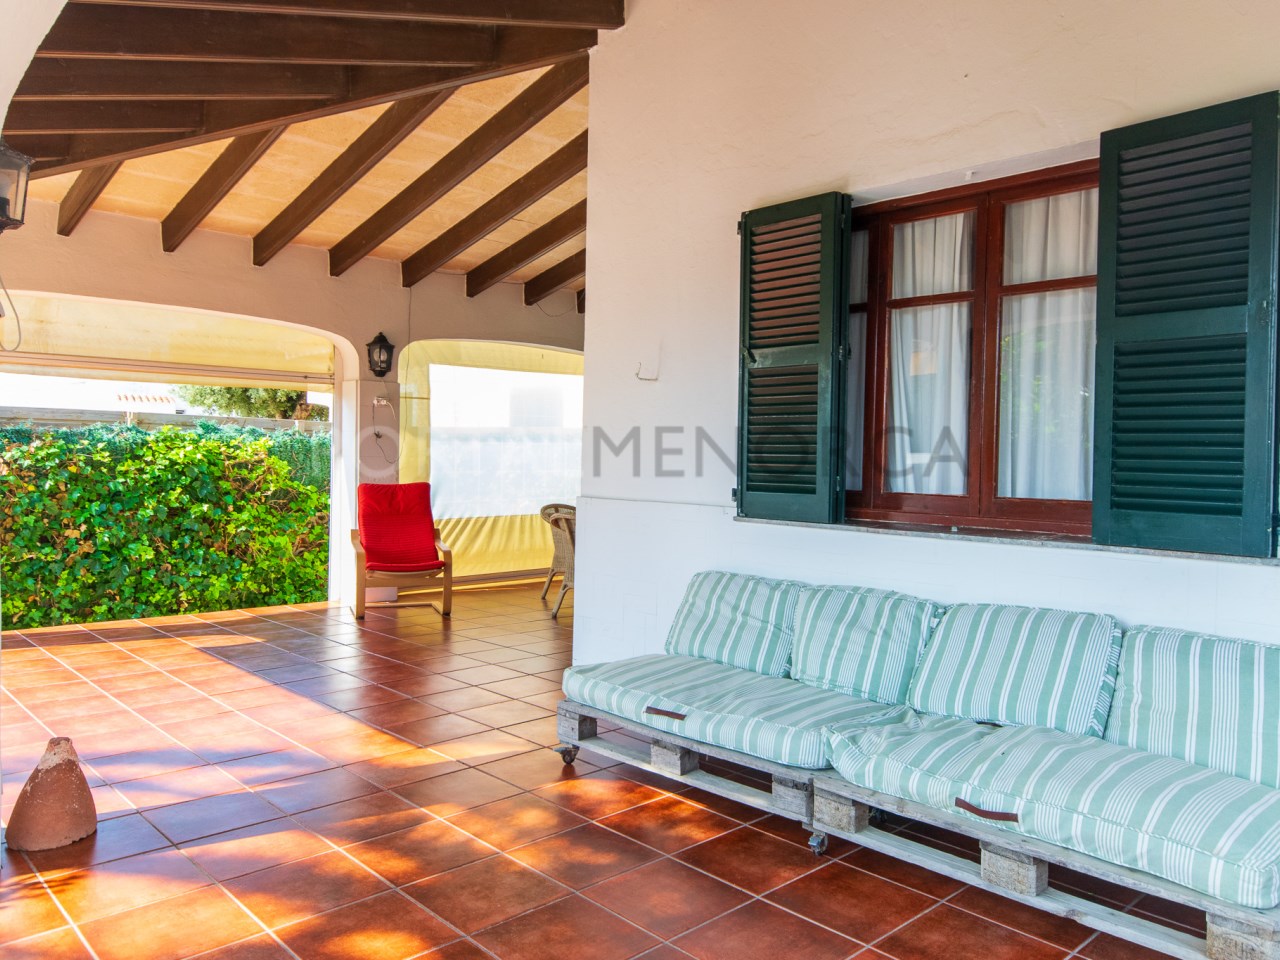 Covered terrace in villa with tourist license for sale in Cala n Bosch